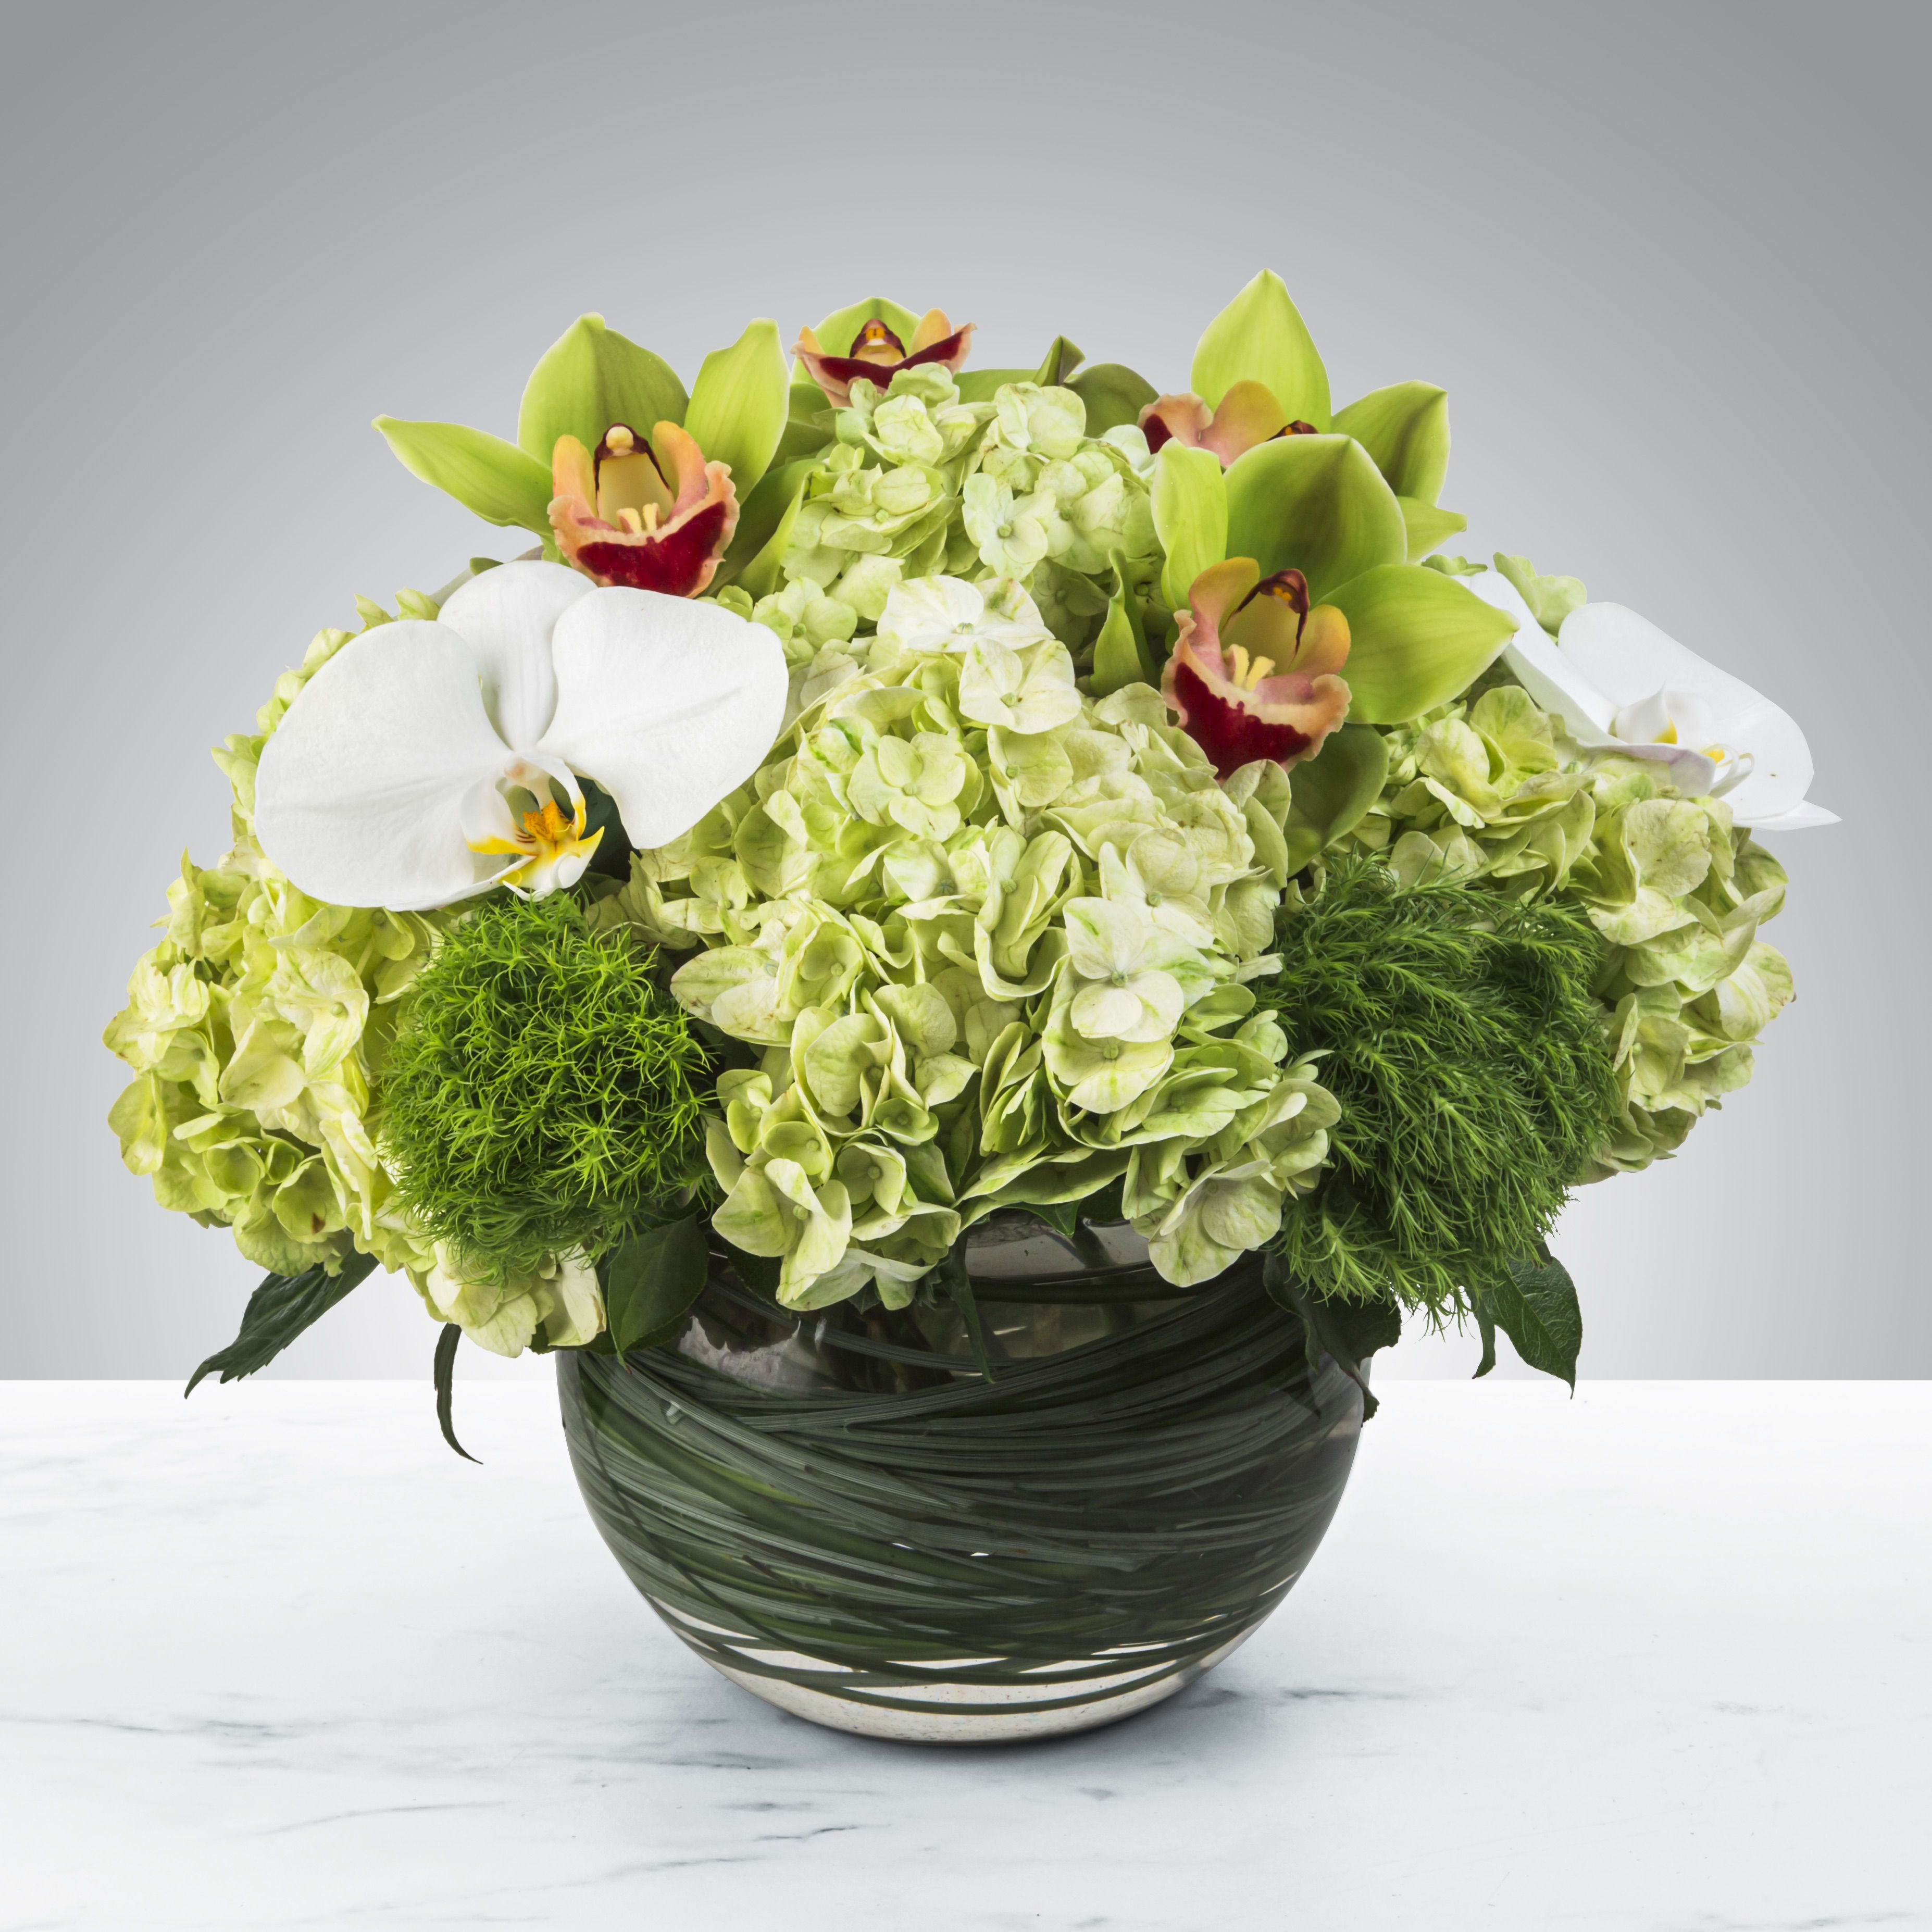 Smiles all Around - Two different types of orchids and hydrangea come together for this bubble of blooms. Standard size is approximately 16in (W) x 14in (H). Deluxe version is larger and features more blooms along with larger bubble bowl vase.  Standard - As Pictured - Smiles all Around - 8in Bubble Bowl Vase Deluxe - Jumbo - Smiles all Around - 10in Bubble Bowl Vase  Care Tips: Place your bouquet in a cool location. Don't put the arrangement in direct sunlight, near heating or cooling vents, in drafty places, directly under ceiling fans, or on top of televisions or radiators. Check water level daily, keep the vase full with clean water. Change water every 2-3 days and apply a sharp fresh cut to the stems. This process will ensure extended flower's life span.